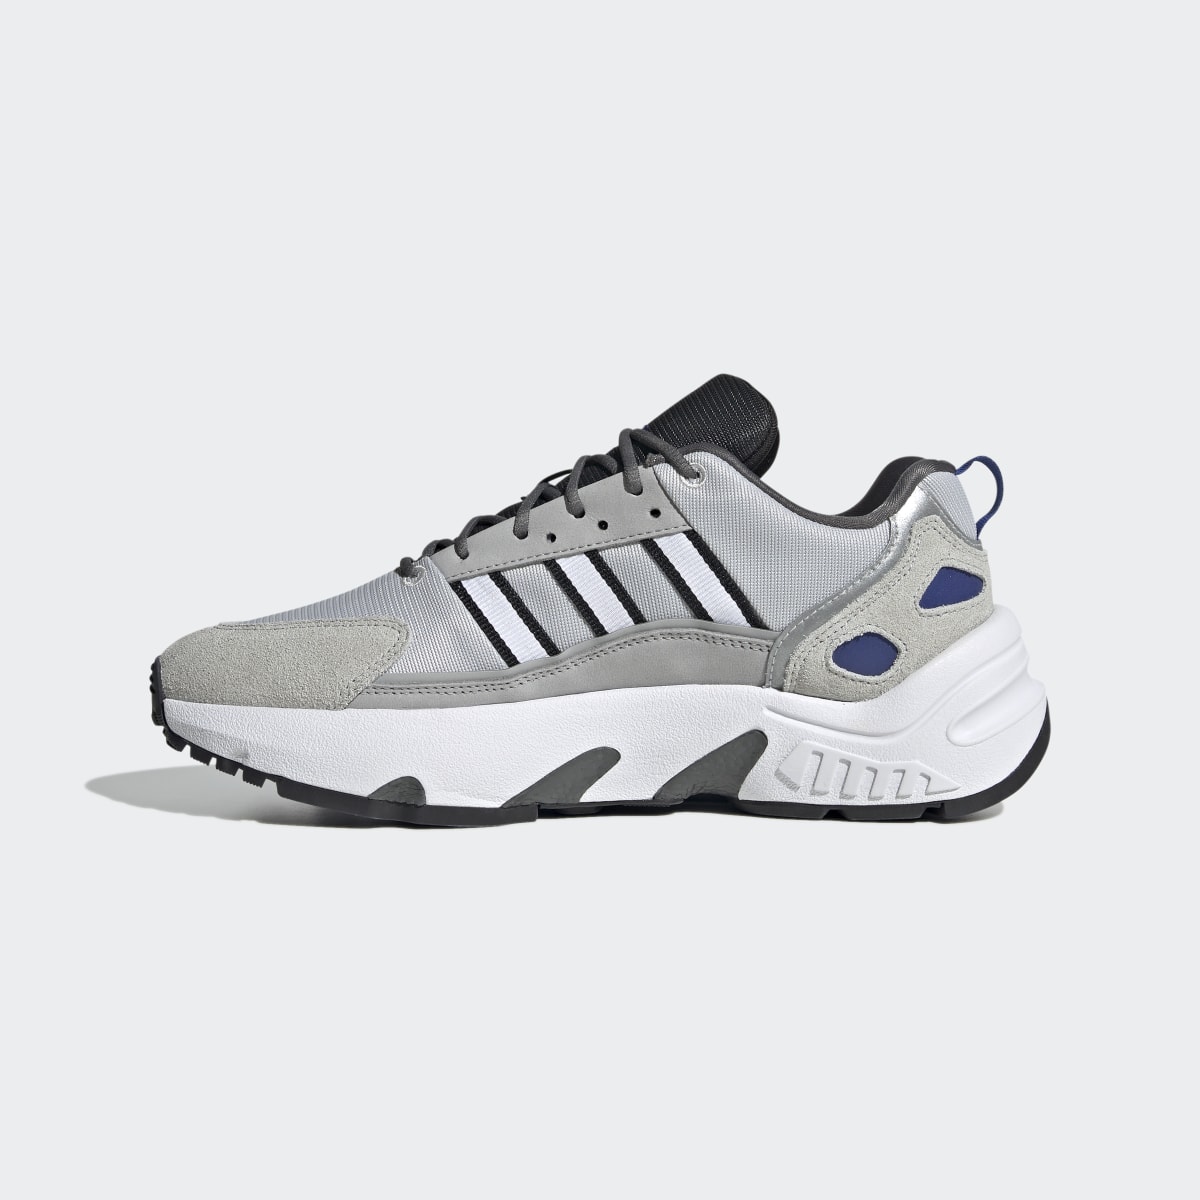 Adidas ZX 22 BOOST Shoes. 7